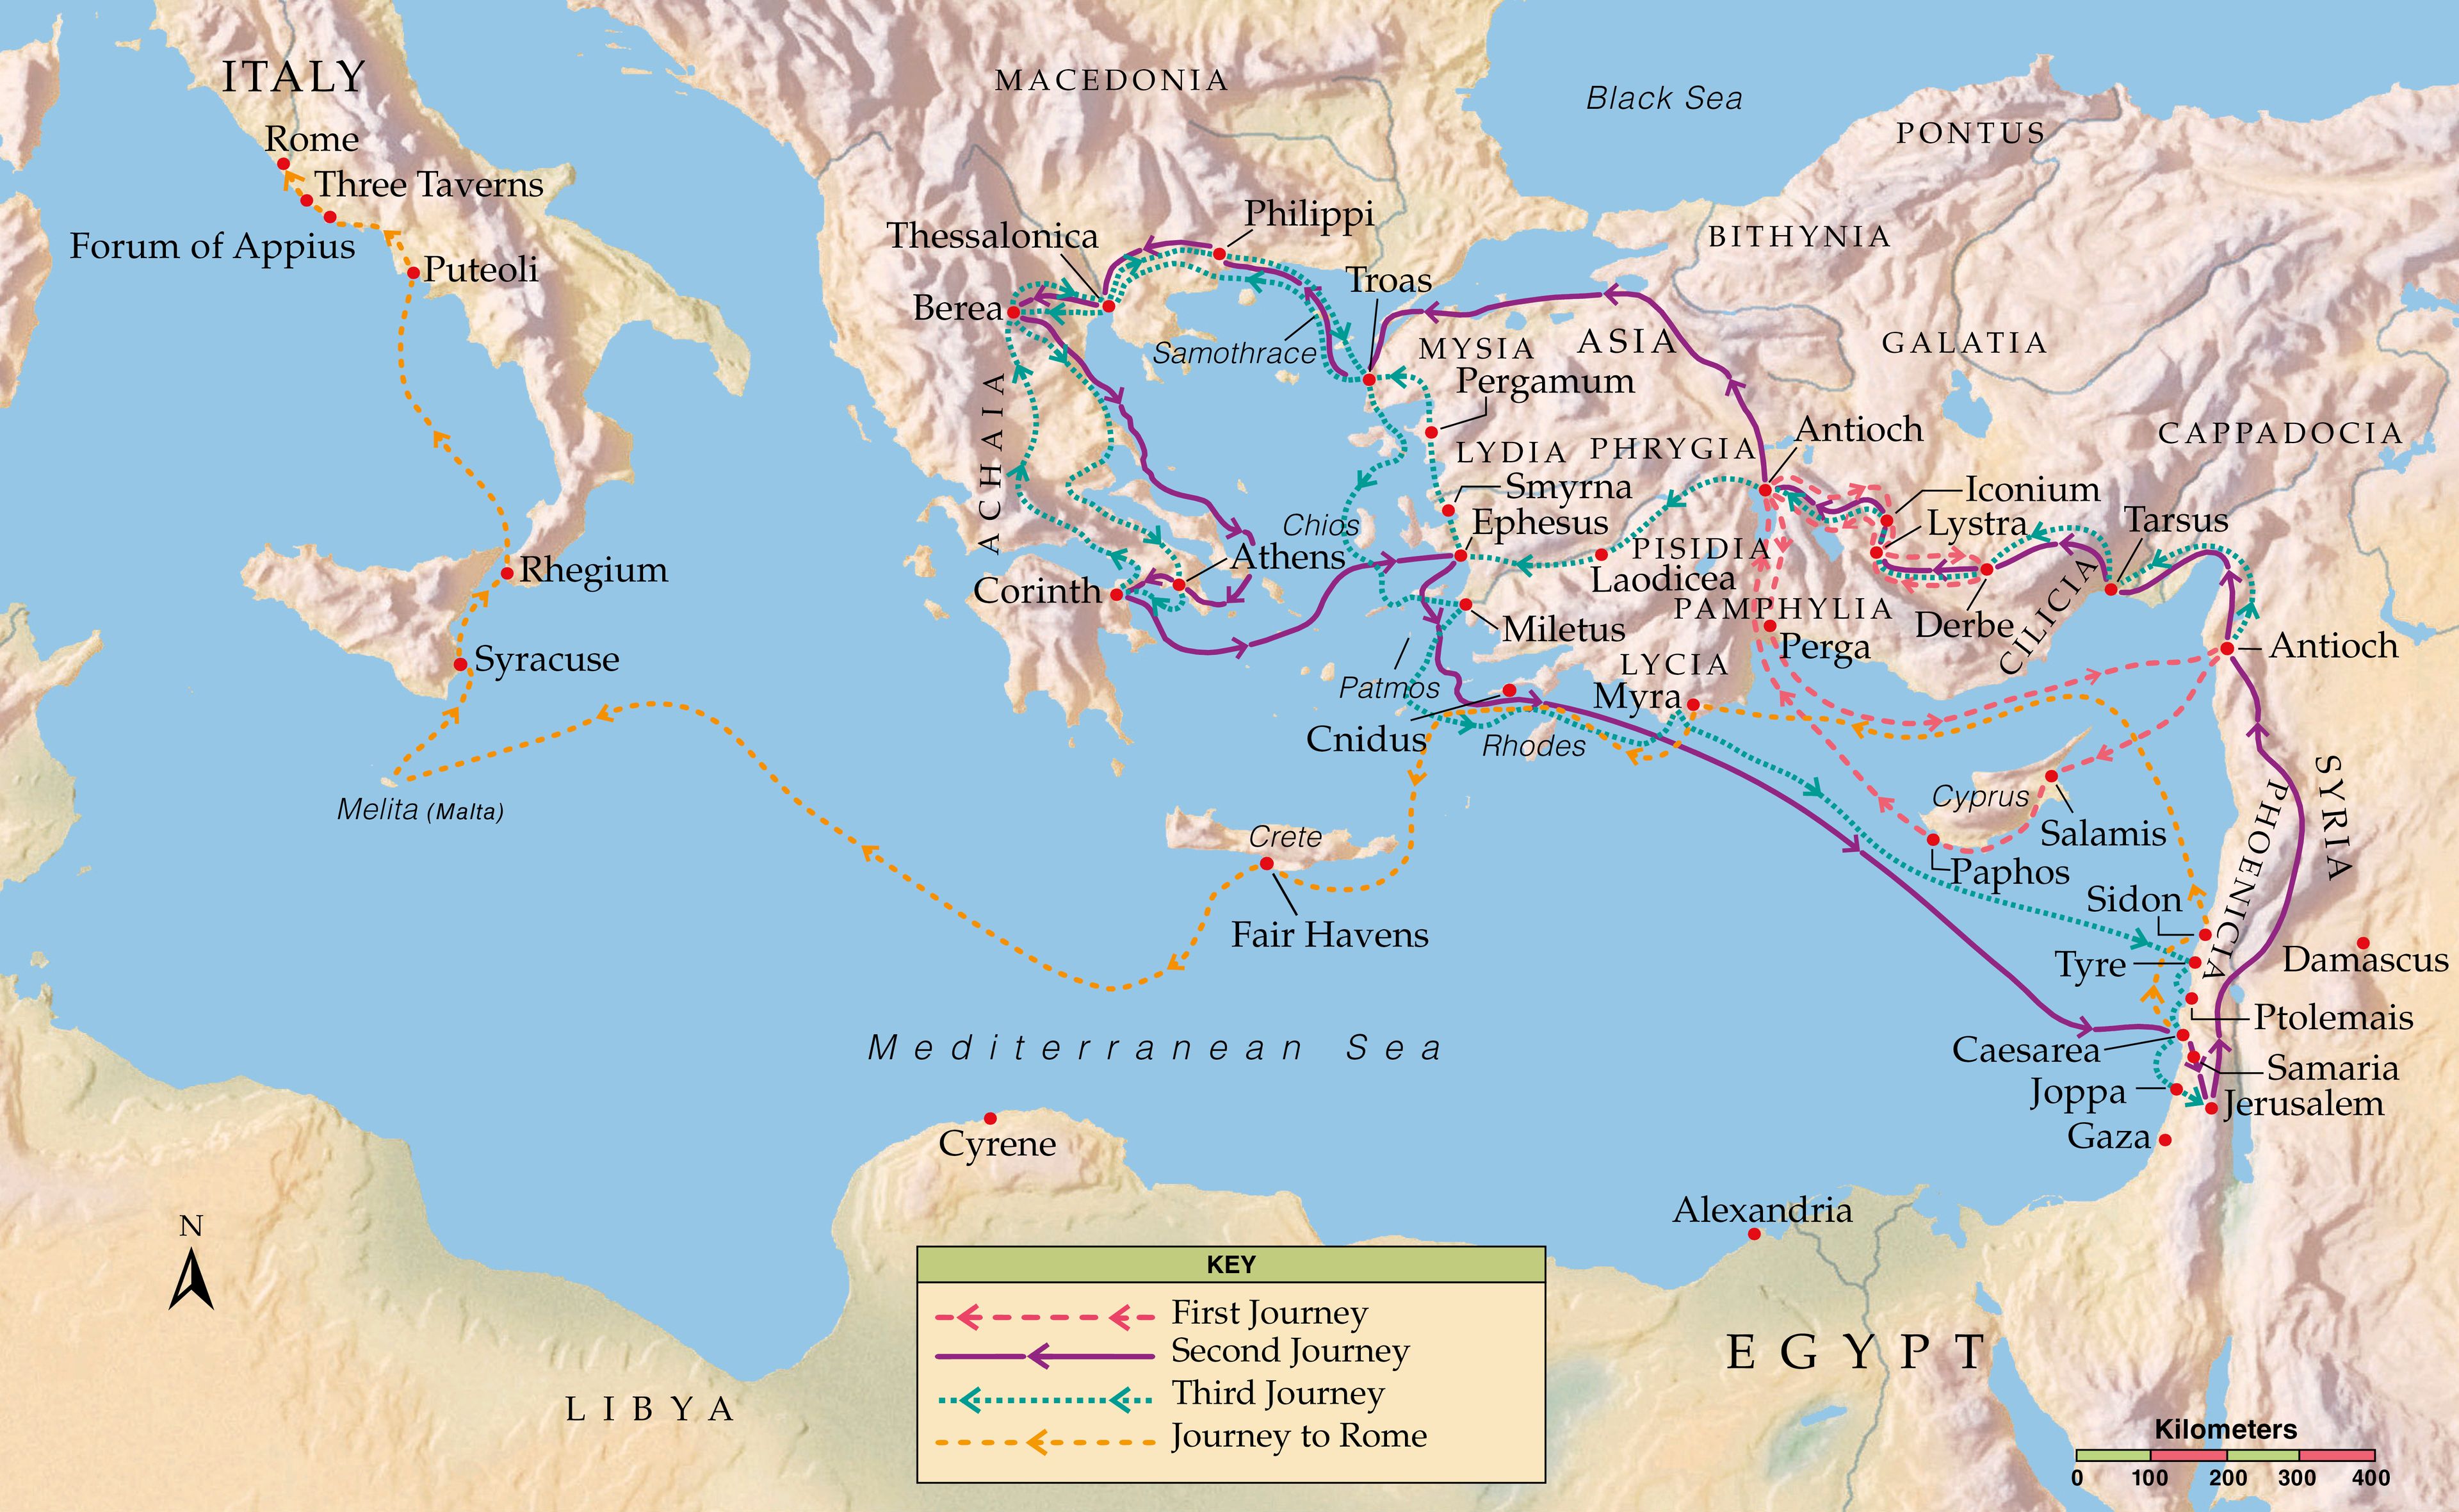 A map showing the missionary journeys of the Apostle Paul.